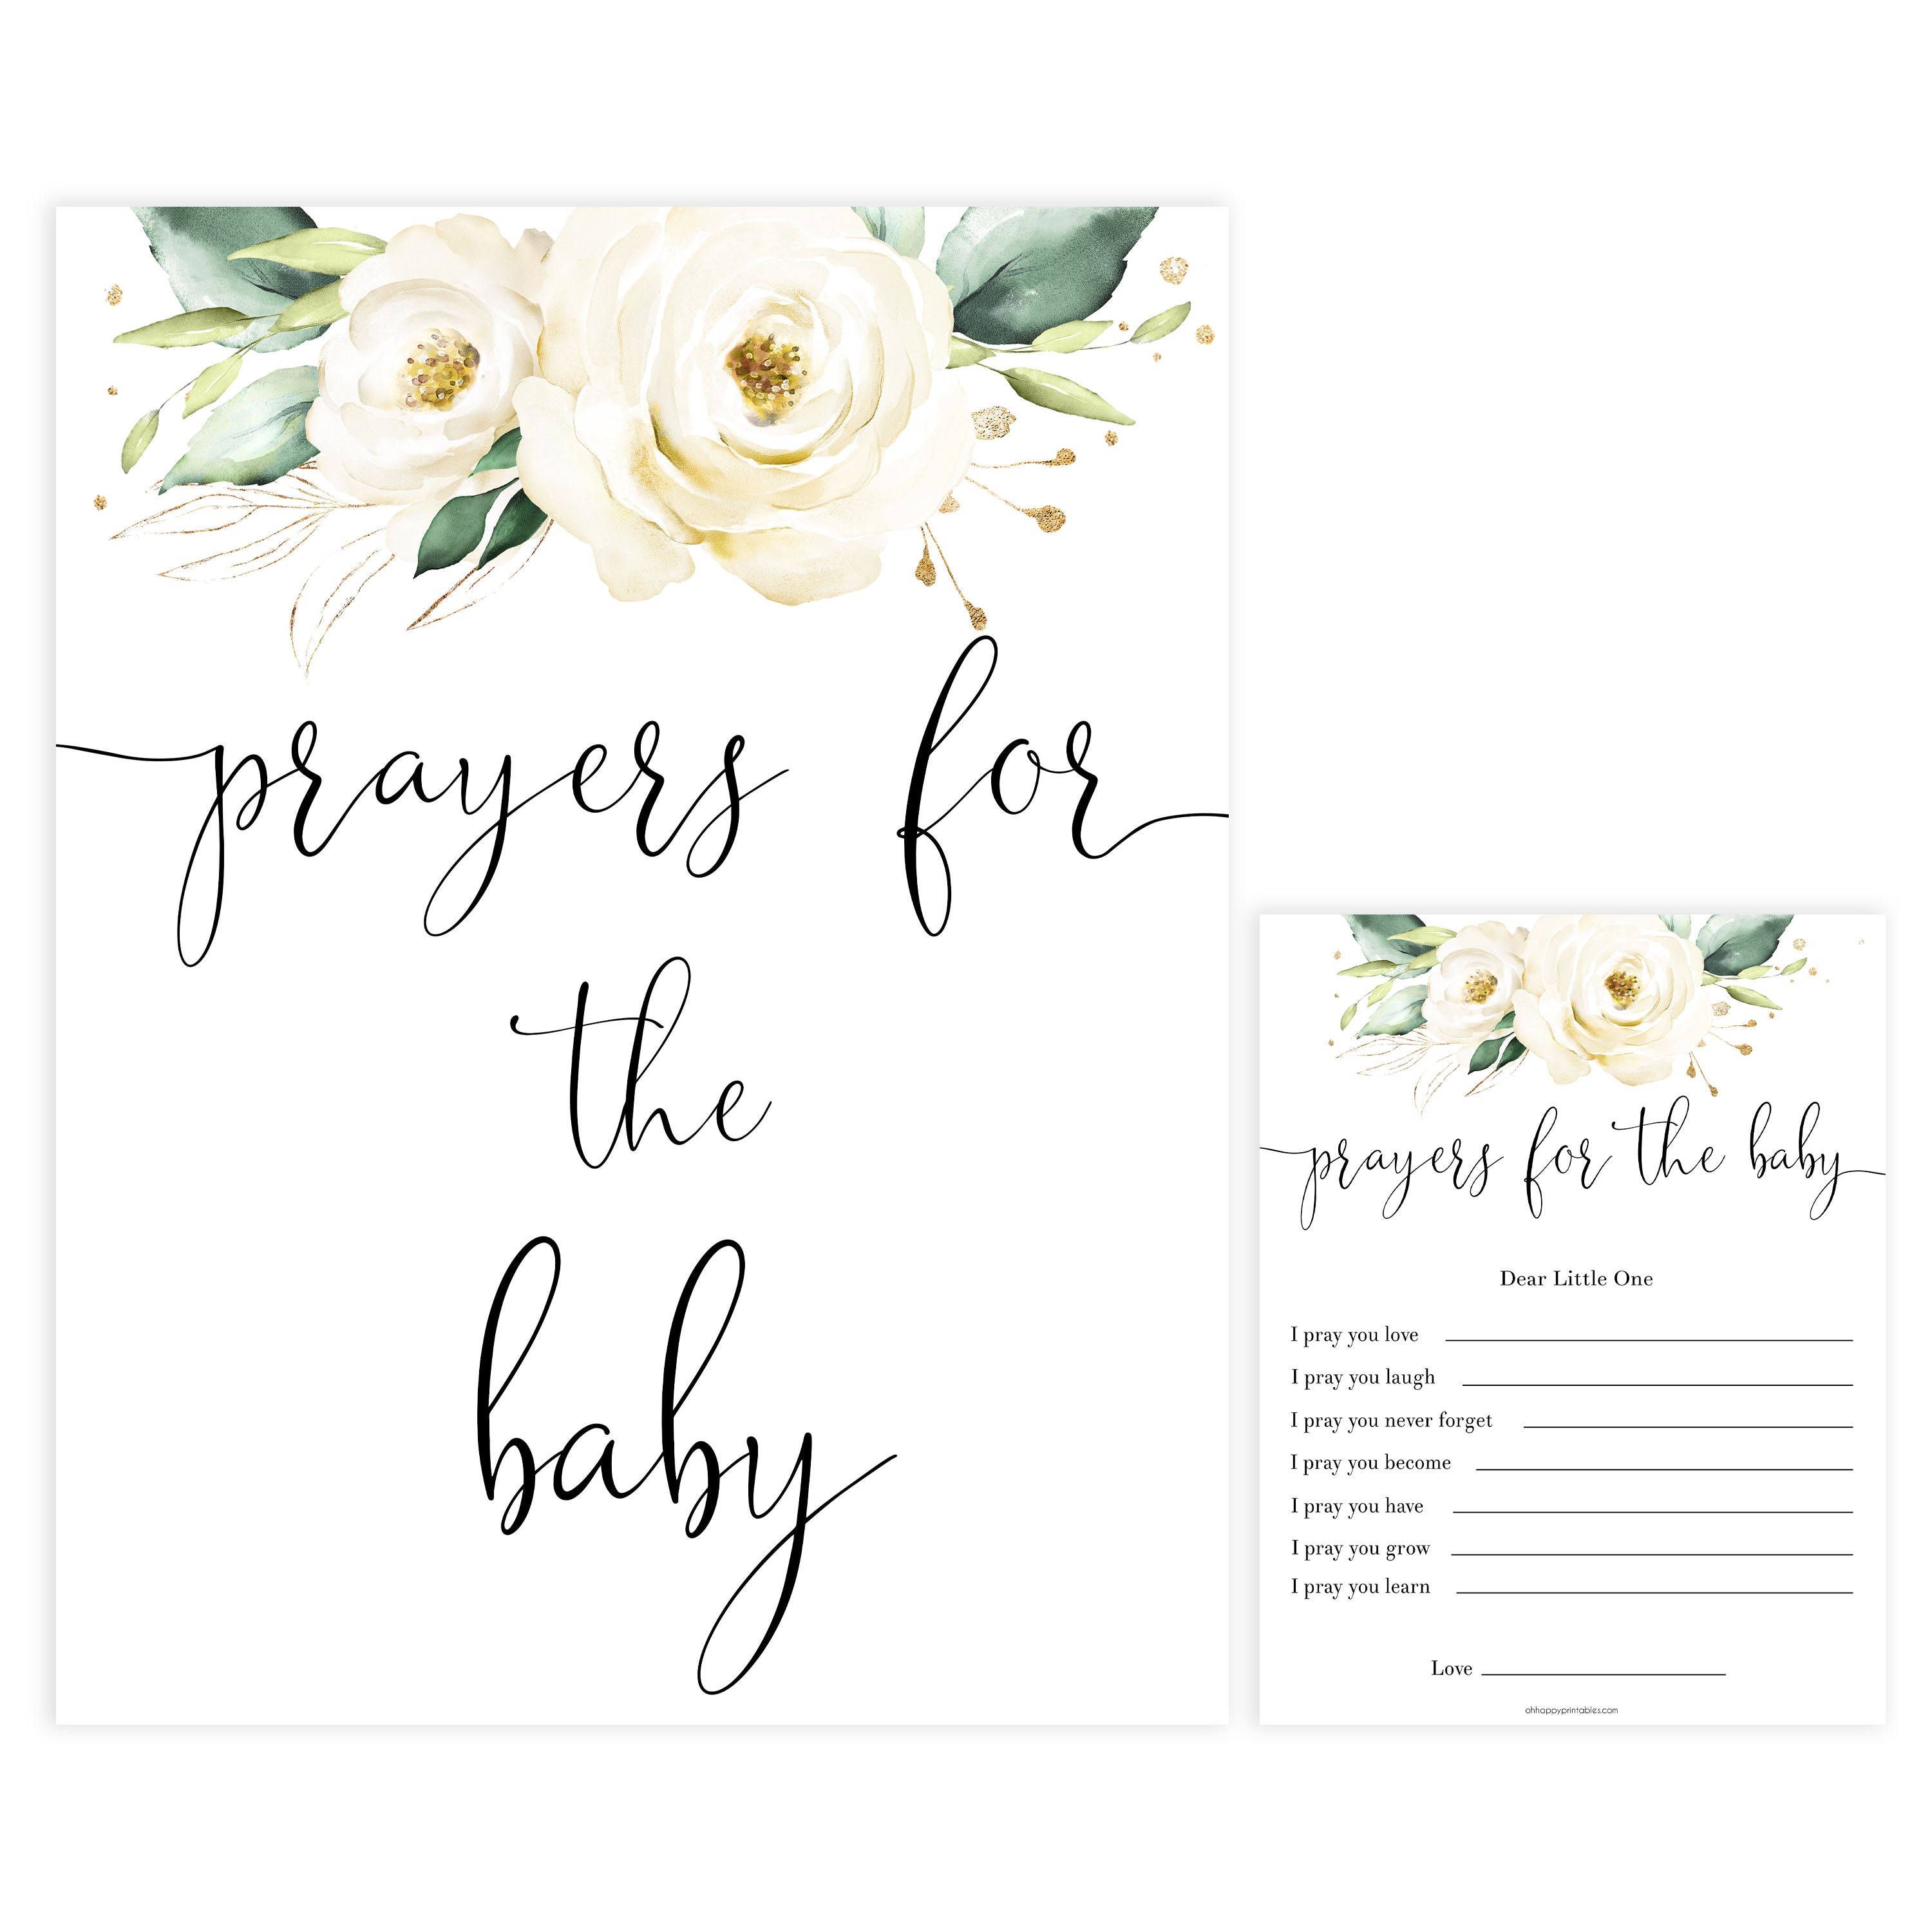 prayers for the baby game, Printable baby shower games, shite floral baby games, baby shower games, fun baby shower ideas, top baby shower ideas, floral baby shower, baby shower games, fun floral baby shower ideas